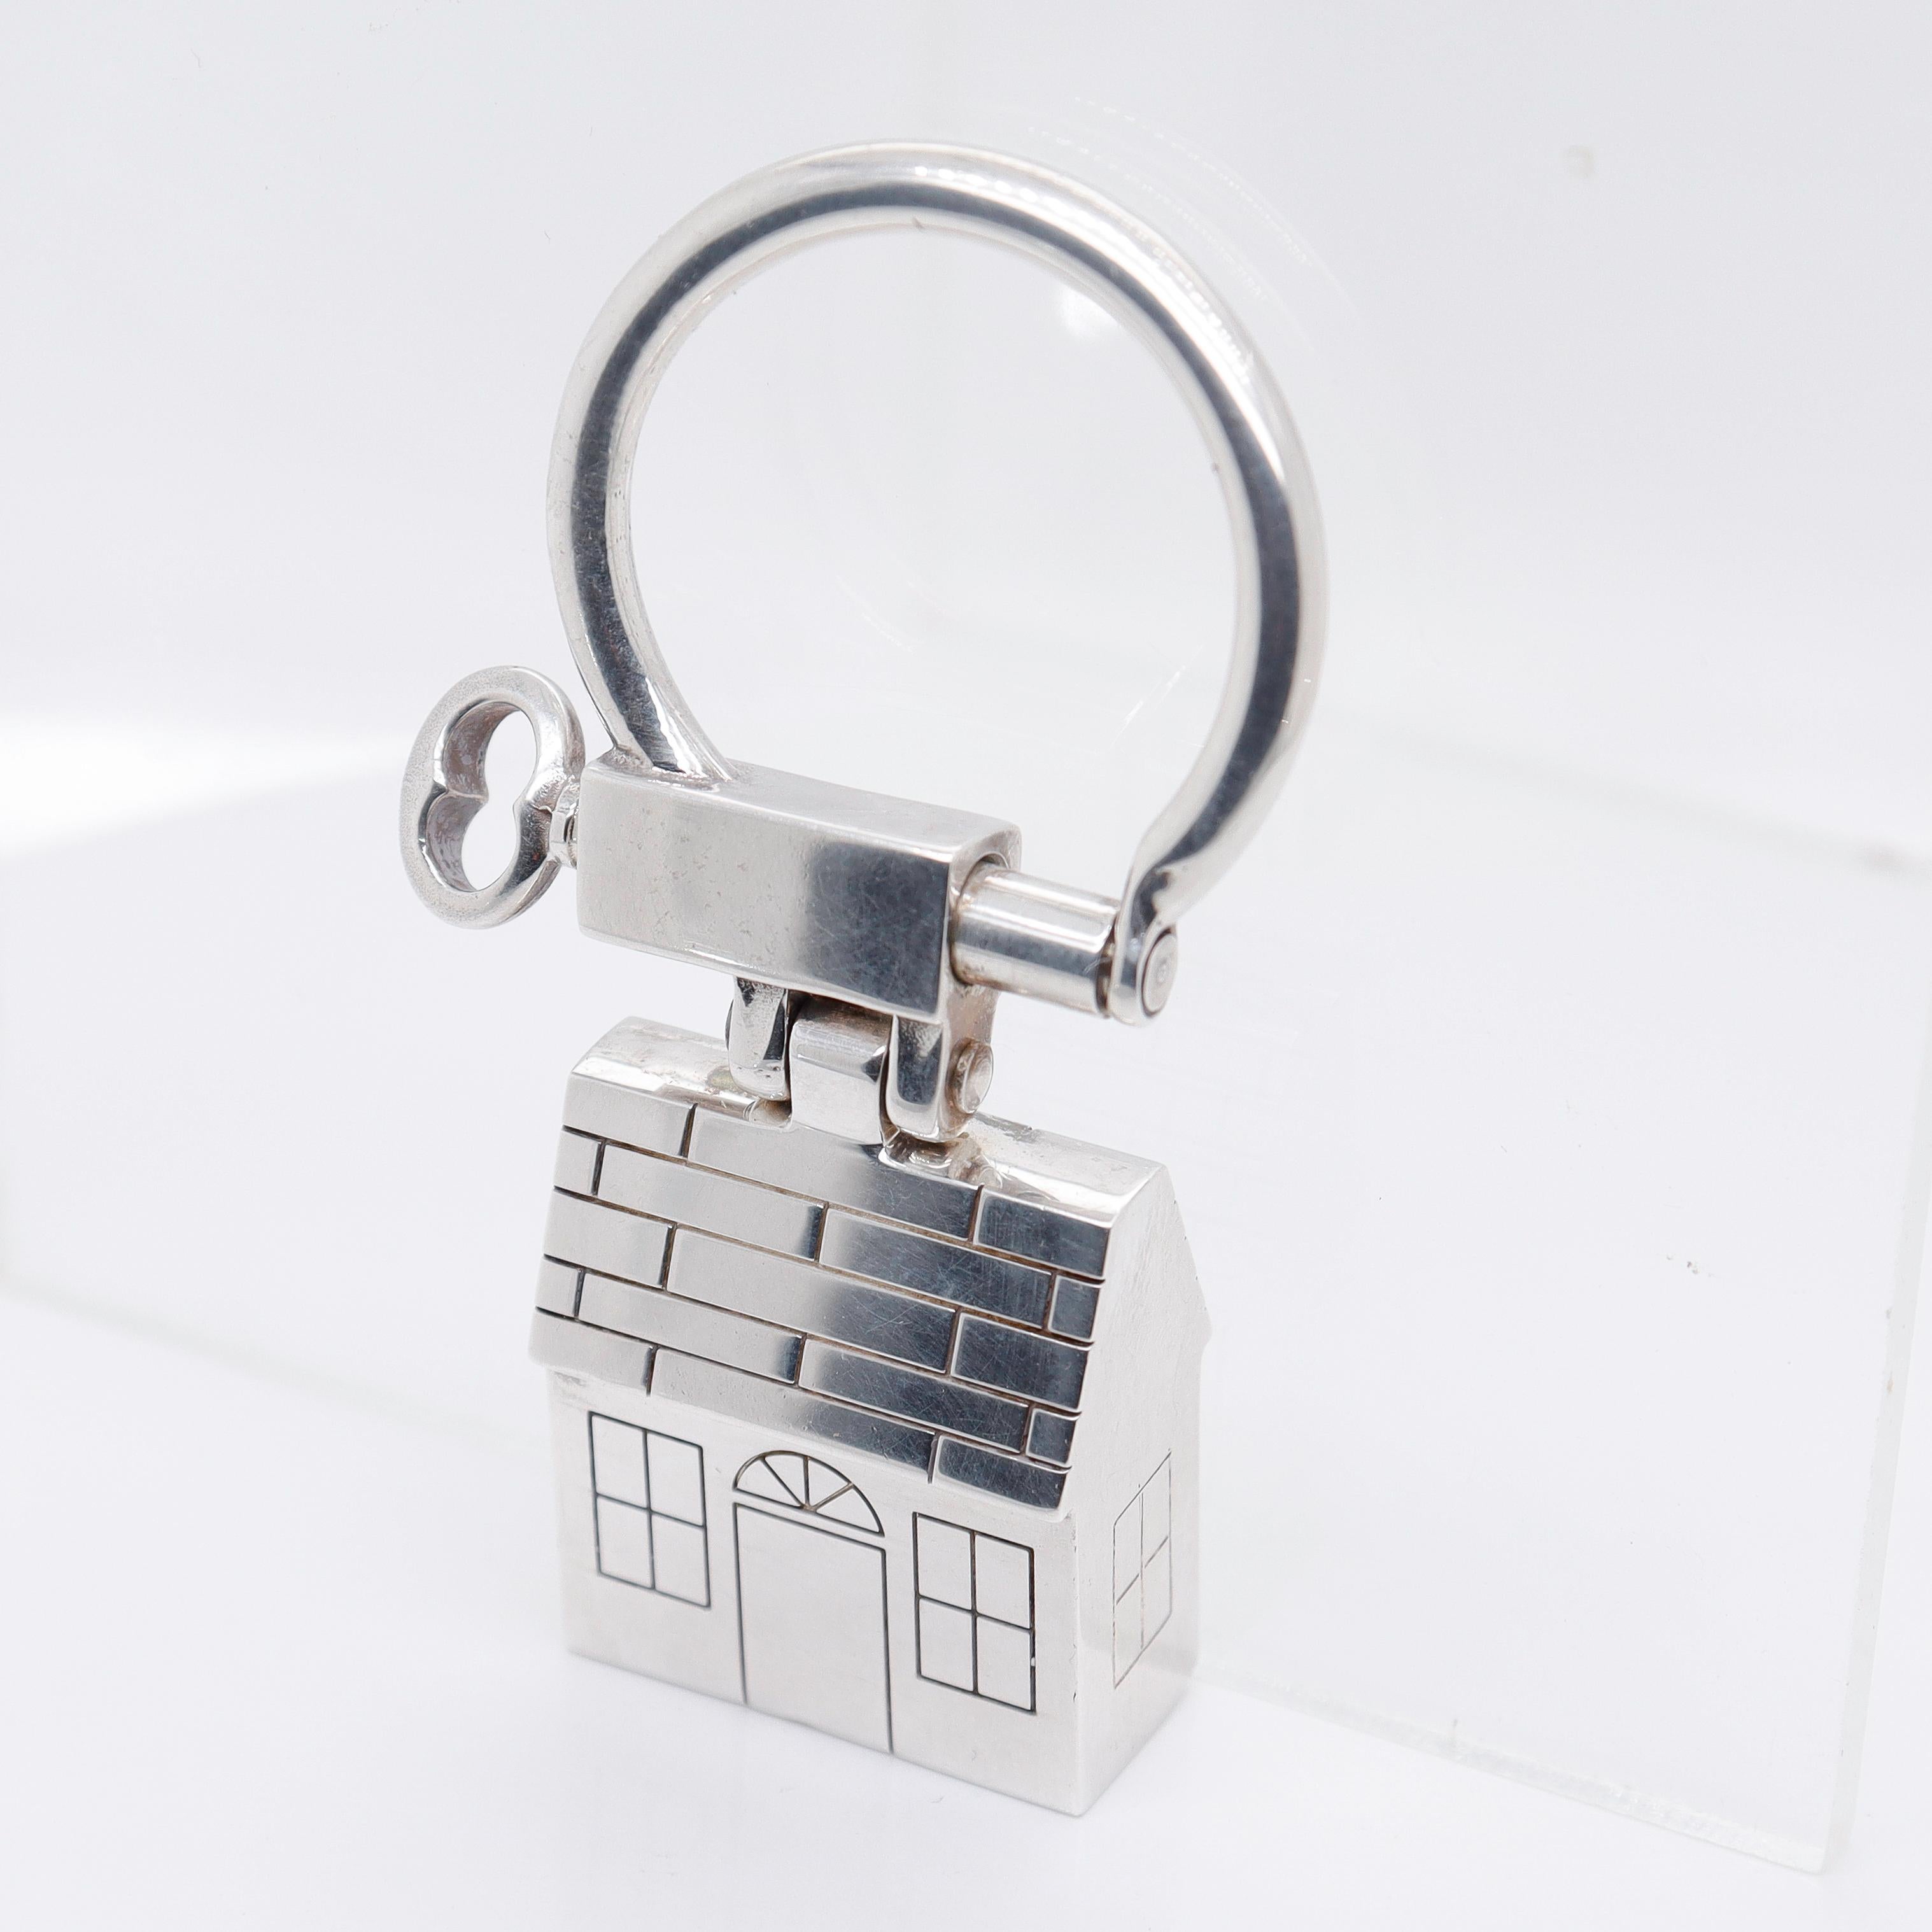 A fine silver key ring or key holder.

In sterling silver.

By Tiffany & Co.

In the form of a house.

Simply a wonderful key ring or holder from Tiffany!

Date:
ca. 1990s

Overall Condition:
It is in overall good, as-pictured, used estate condition